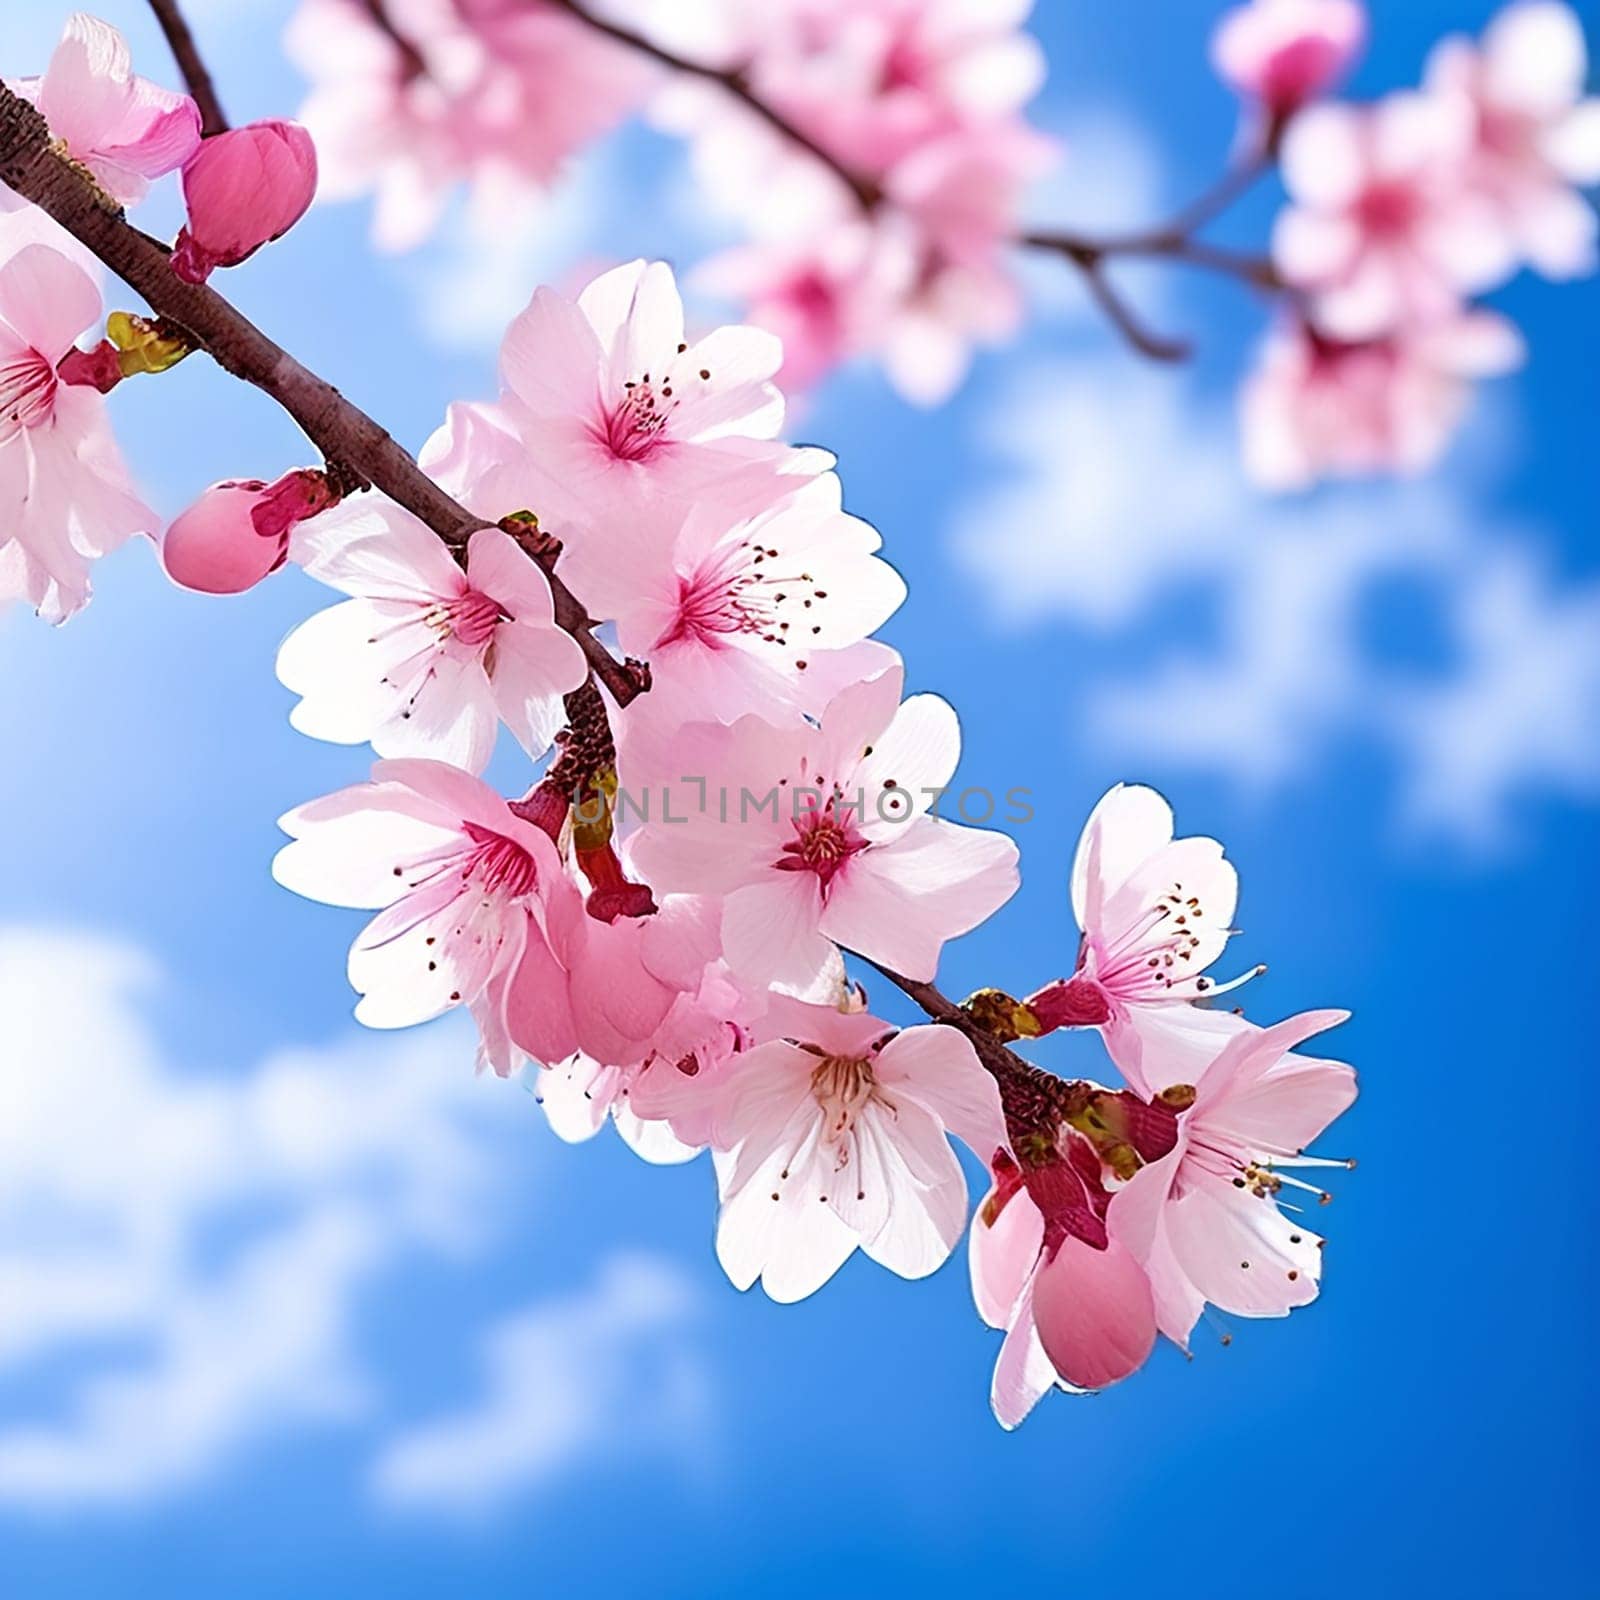 Nature's Delight: Spring Blossom Background with Sakura Trees and Vibrant Flowers by Petrichor